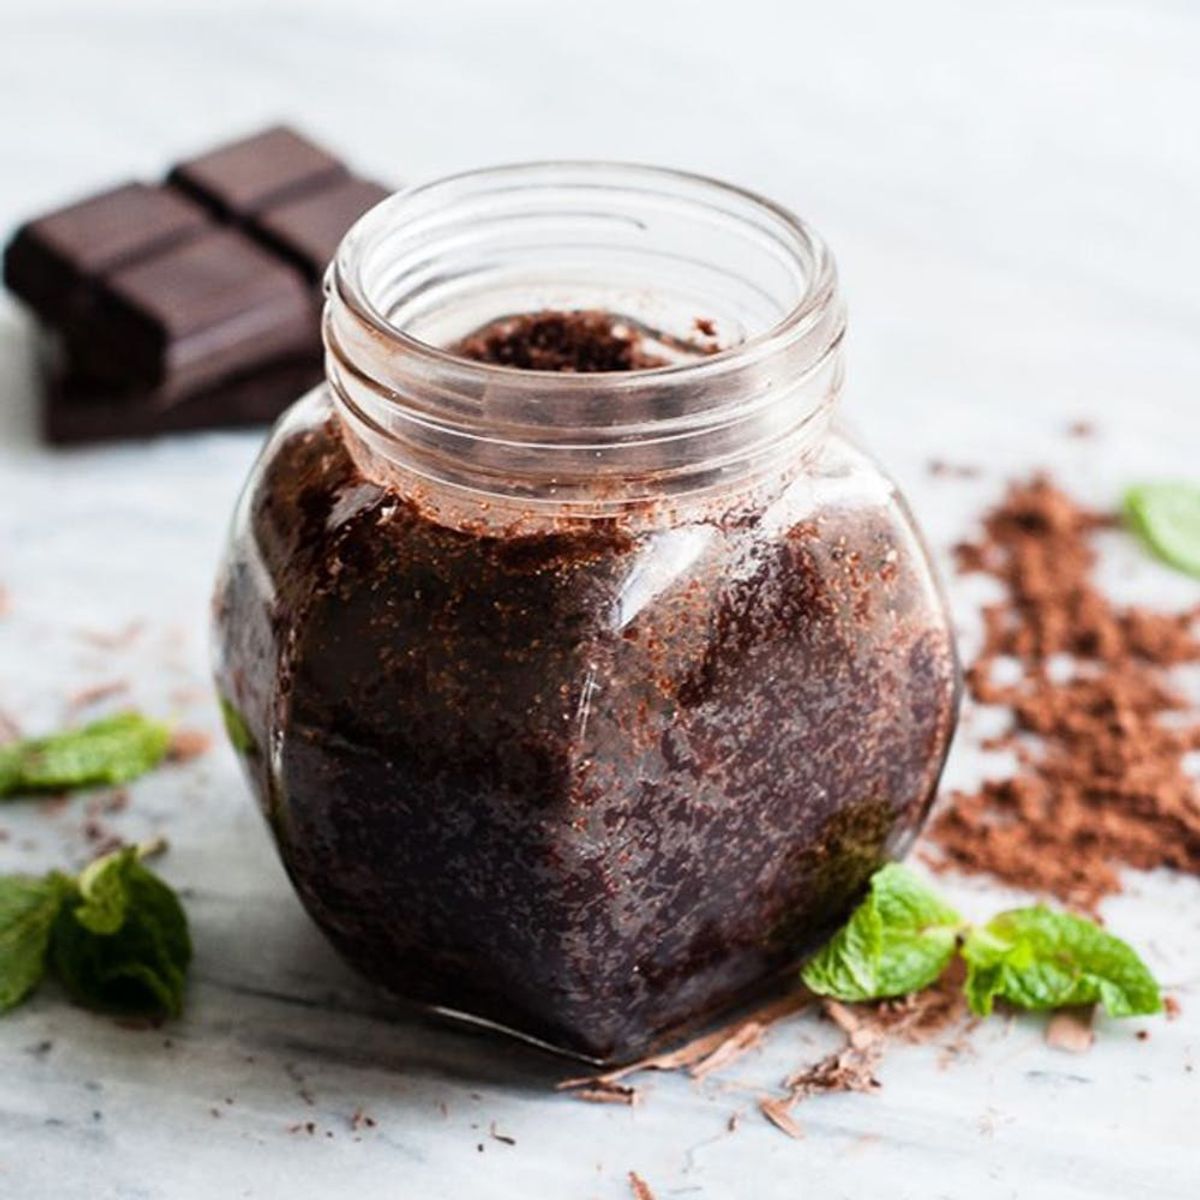 12 Beauty DIY Recipes You Can Make With Chocolate